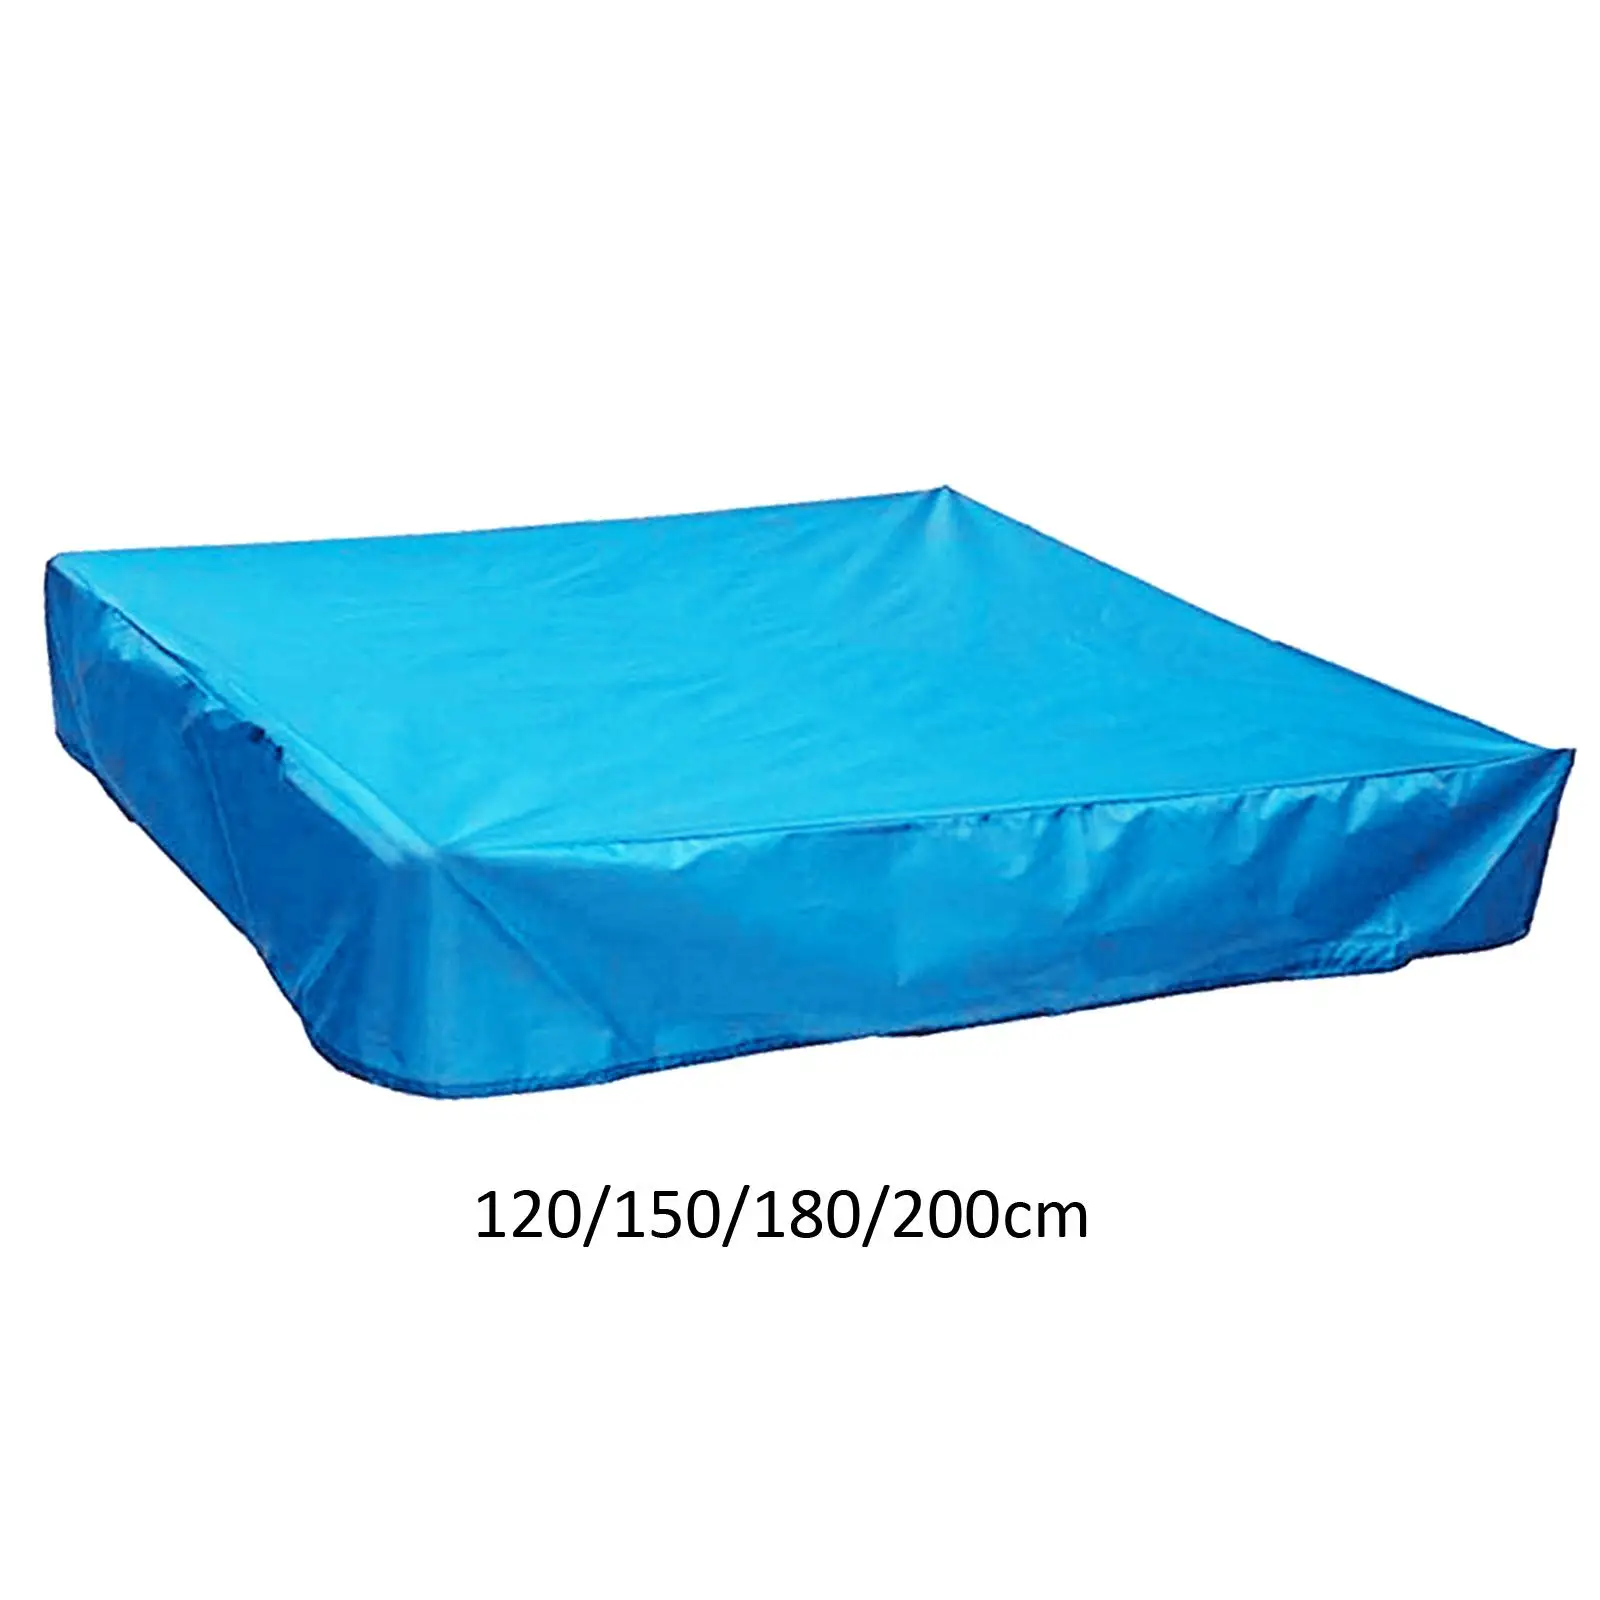 Shelter Sandbox Canopy with Drawstring Multifunction Durable Accessories Oxford Cloth Sandpit Garden Sandbox Cover for Beach